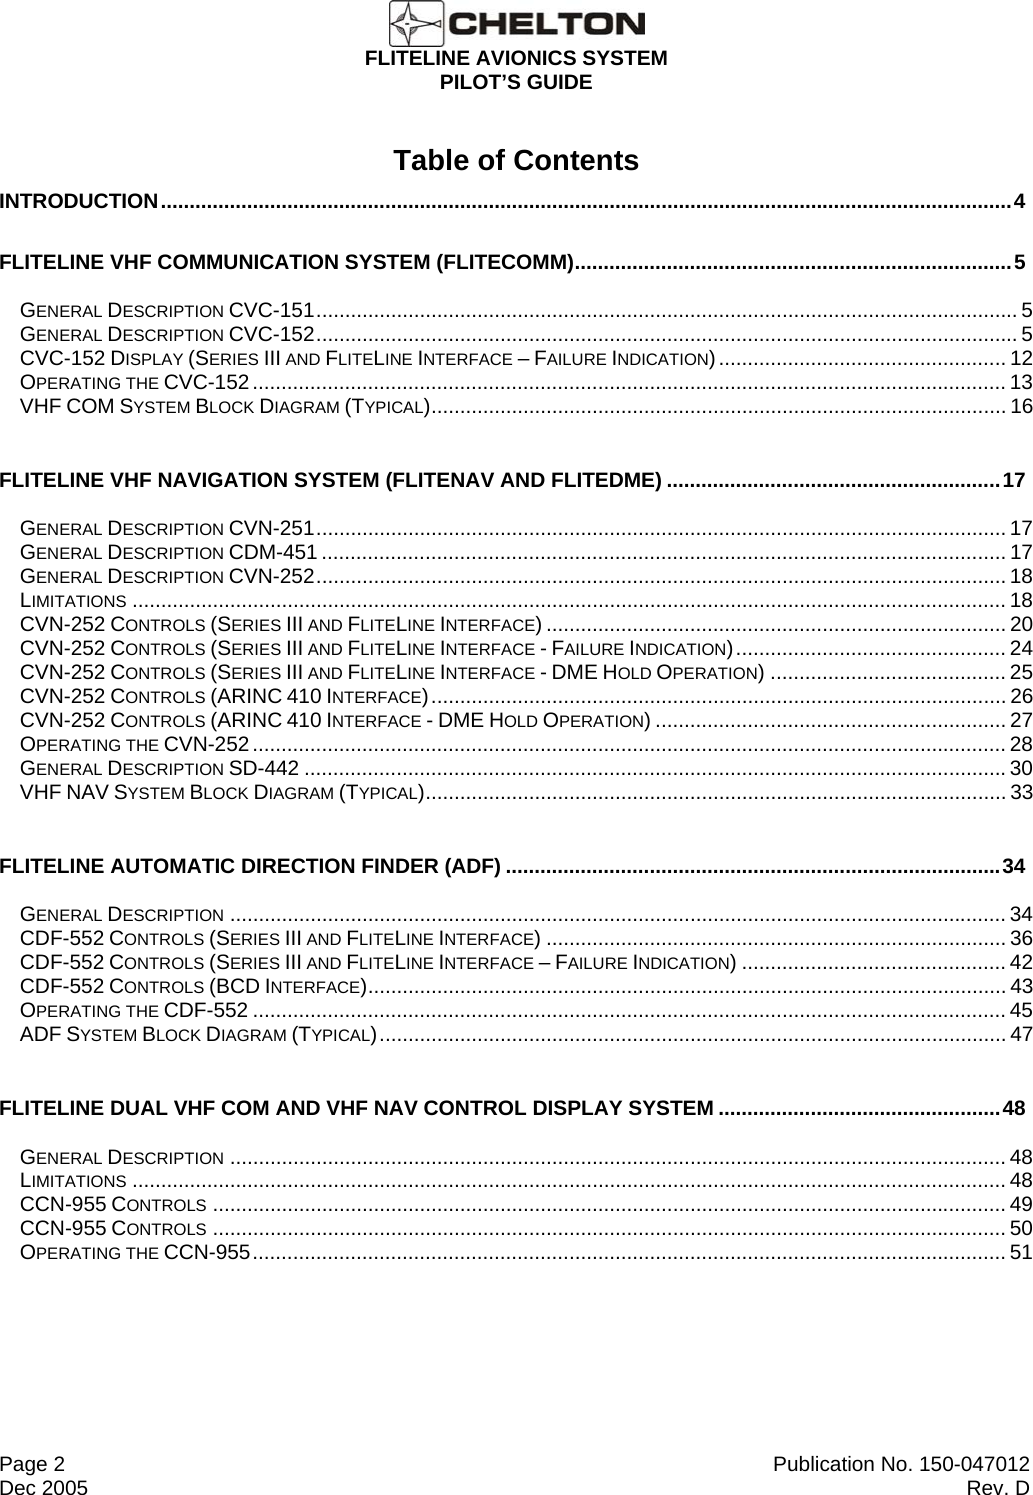  FLITELINE AVIONICS SYSTEM PILOT’S GUIDE  Page 2  Publication No. 150-047012 Dec 2005  Rev. D Table of Contents INTRODUCTION....................................................................................................................................................4 FLITELINE VHF COMMUNICATION SYSTEM (FLITECOMM)............................................................................5 GENERAL DESCRIPTION CVC-151.......................................................................................................................... 5 GENERAL DESCRIPTION CVC-152.......................................................................................................................... 5 CVC-152 DISPLAY (SERIES III AND FLITELINE INTERFACE – FAILURE INDICATION).................................................. 12 OPERATING THE CVC-152................................................................................................................................... 13 VHF COM SYSTEM BLOCK DIAGRAM (TYPICAL).................................................................................................... 16 FLITELINE VHF NAVIGATION SYSTEM (FLITENAV AND FLITEDME) ..........................................................17 GENERAL DESCRIPTION CVN-251........................................................................................................................ 17 GENERAL DESCRIPTION CDM-451 ....................................................................................................................... 17 GENERAL DESCRIPTION CVN-252........................................................................................................................ 18 LIMITATIONS ........................................................................................................................................................ 18 CVN-252 CONTROLS (SERIES III AND FLITELINE INTERFACE) ................................................................................ 20 CVN-252 CONTROLS (SERIES III AND FLITELINE INTERFACE - FAILURE INDICATION)............................................... 24 CVN-252 CONTROLS (SERIES III AND FLITELINE INTERFACE - DME HOLD OPERATION) ......................................... 25 CVN-252 CONTROLS (ARINC 410 INTERFACE).................................................................................................... 26 CVN-252 CONTROLS (ARINC 410 INTERFACE - DME HOLD OPERATION) ............................................................. 27 OPERATING THE CVN-252................................................................................................................................... 28 GENERAL DESCRIPTION SD-442 ..........................................................................................................................30 VHF NAV SYSTEM BLOCK DIAGRAM (TYPICAL)..................................................................................................... 33 FLITELINE AUTOMATIC DIRECTION FINDER (ADF) ......................................................................................34 GENERAL DESCRIPTION ....................................................................................................................................... 34 CDF-552 CONTROLS (SERIES III AND FLITELINE INTERFACE) ................................................................................ 36 CDF-552 CONTROLS (SERIES III AND FLITELINE INTERFACE – FAILURE INDICATION) .............................................. 42 CDF-552 CONTROLS (BCD INTERFACE)............................................................................................................... 43 OPERATING THE CDF-552 ................................................................................................................................... 45 ADF SYSTEM BLOCK DIAGRAM (TYPICAL)............................................................................................................. 47 FLITELINE DUAL VHF COM AND VHF NAV CONTROL DISPLAY SYSTEM .................................................48 GENERAL DESCRIPTION ....................................................................................................................................... 48 LIMITATIONS ........................................................................................................................................................ 48 CCN-955 CONTROLS .......................................................................................................................................... 49 CCN-955 CONTROLS .......................................................................................................................................... 50 OPERATING THE CCN-955................................................................................................................................... 51    